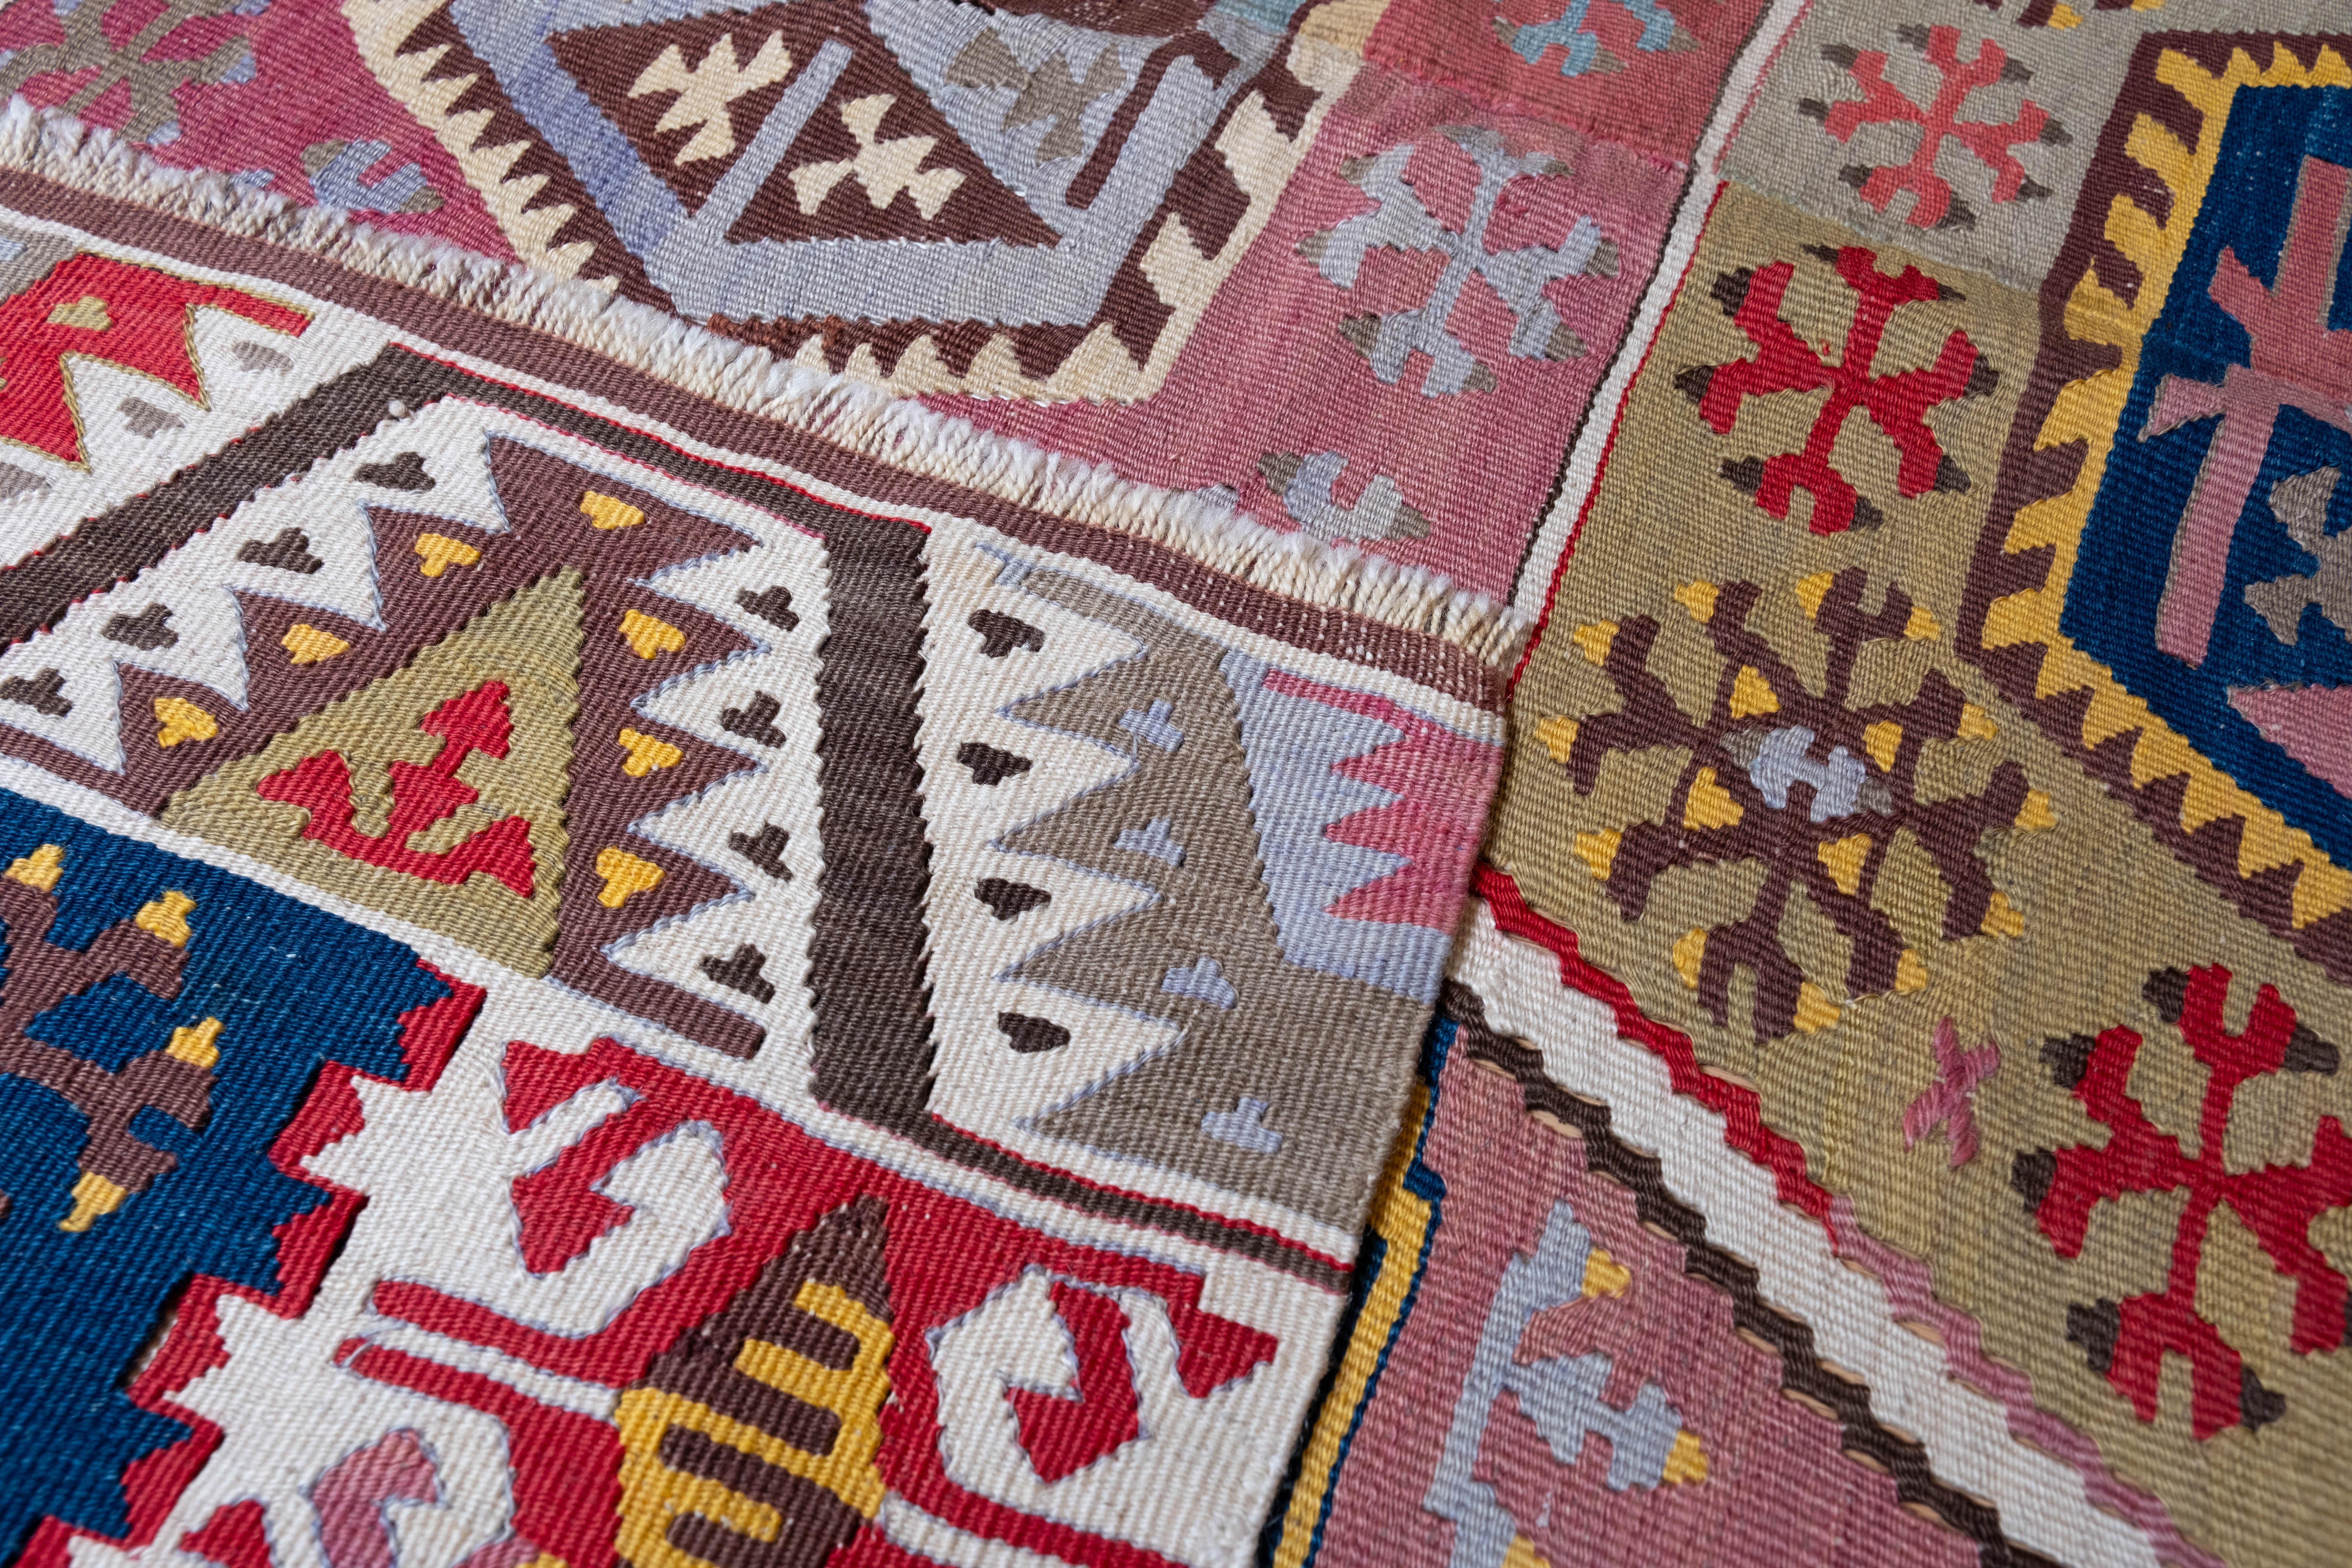 Hand-Woven Antique Konya Kilim Rug Wool Old Central Anatolian Turkish Carpet For Sale